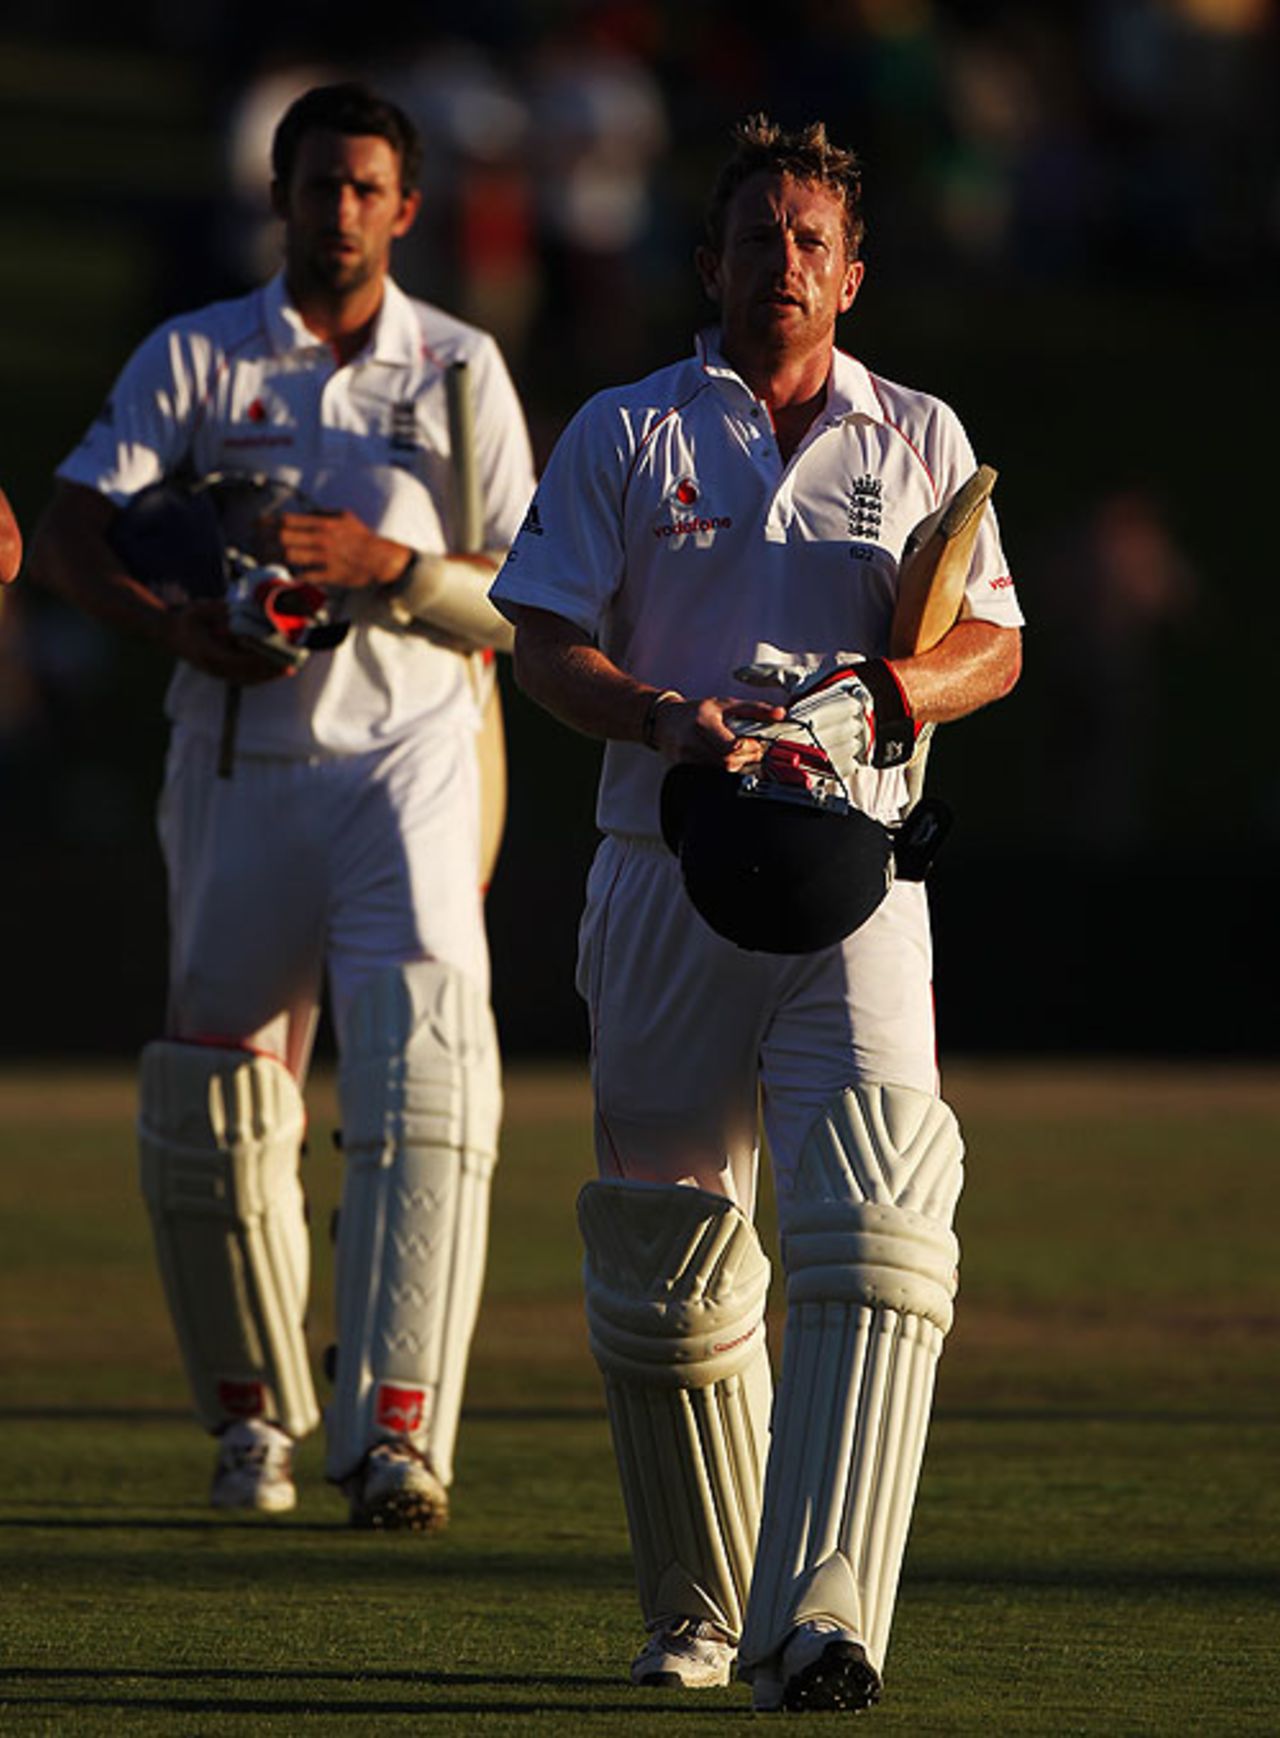 Paul Collingwood and Graham Onions leave the field after their desperate rearguard, South Africa v England, 1st Test, Centurion, 5th day, December 20, 2009